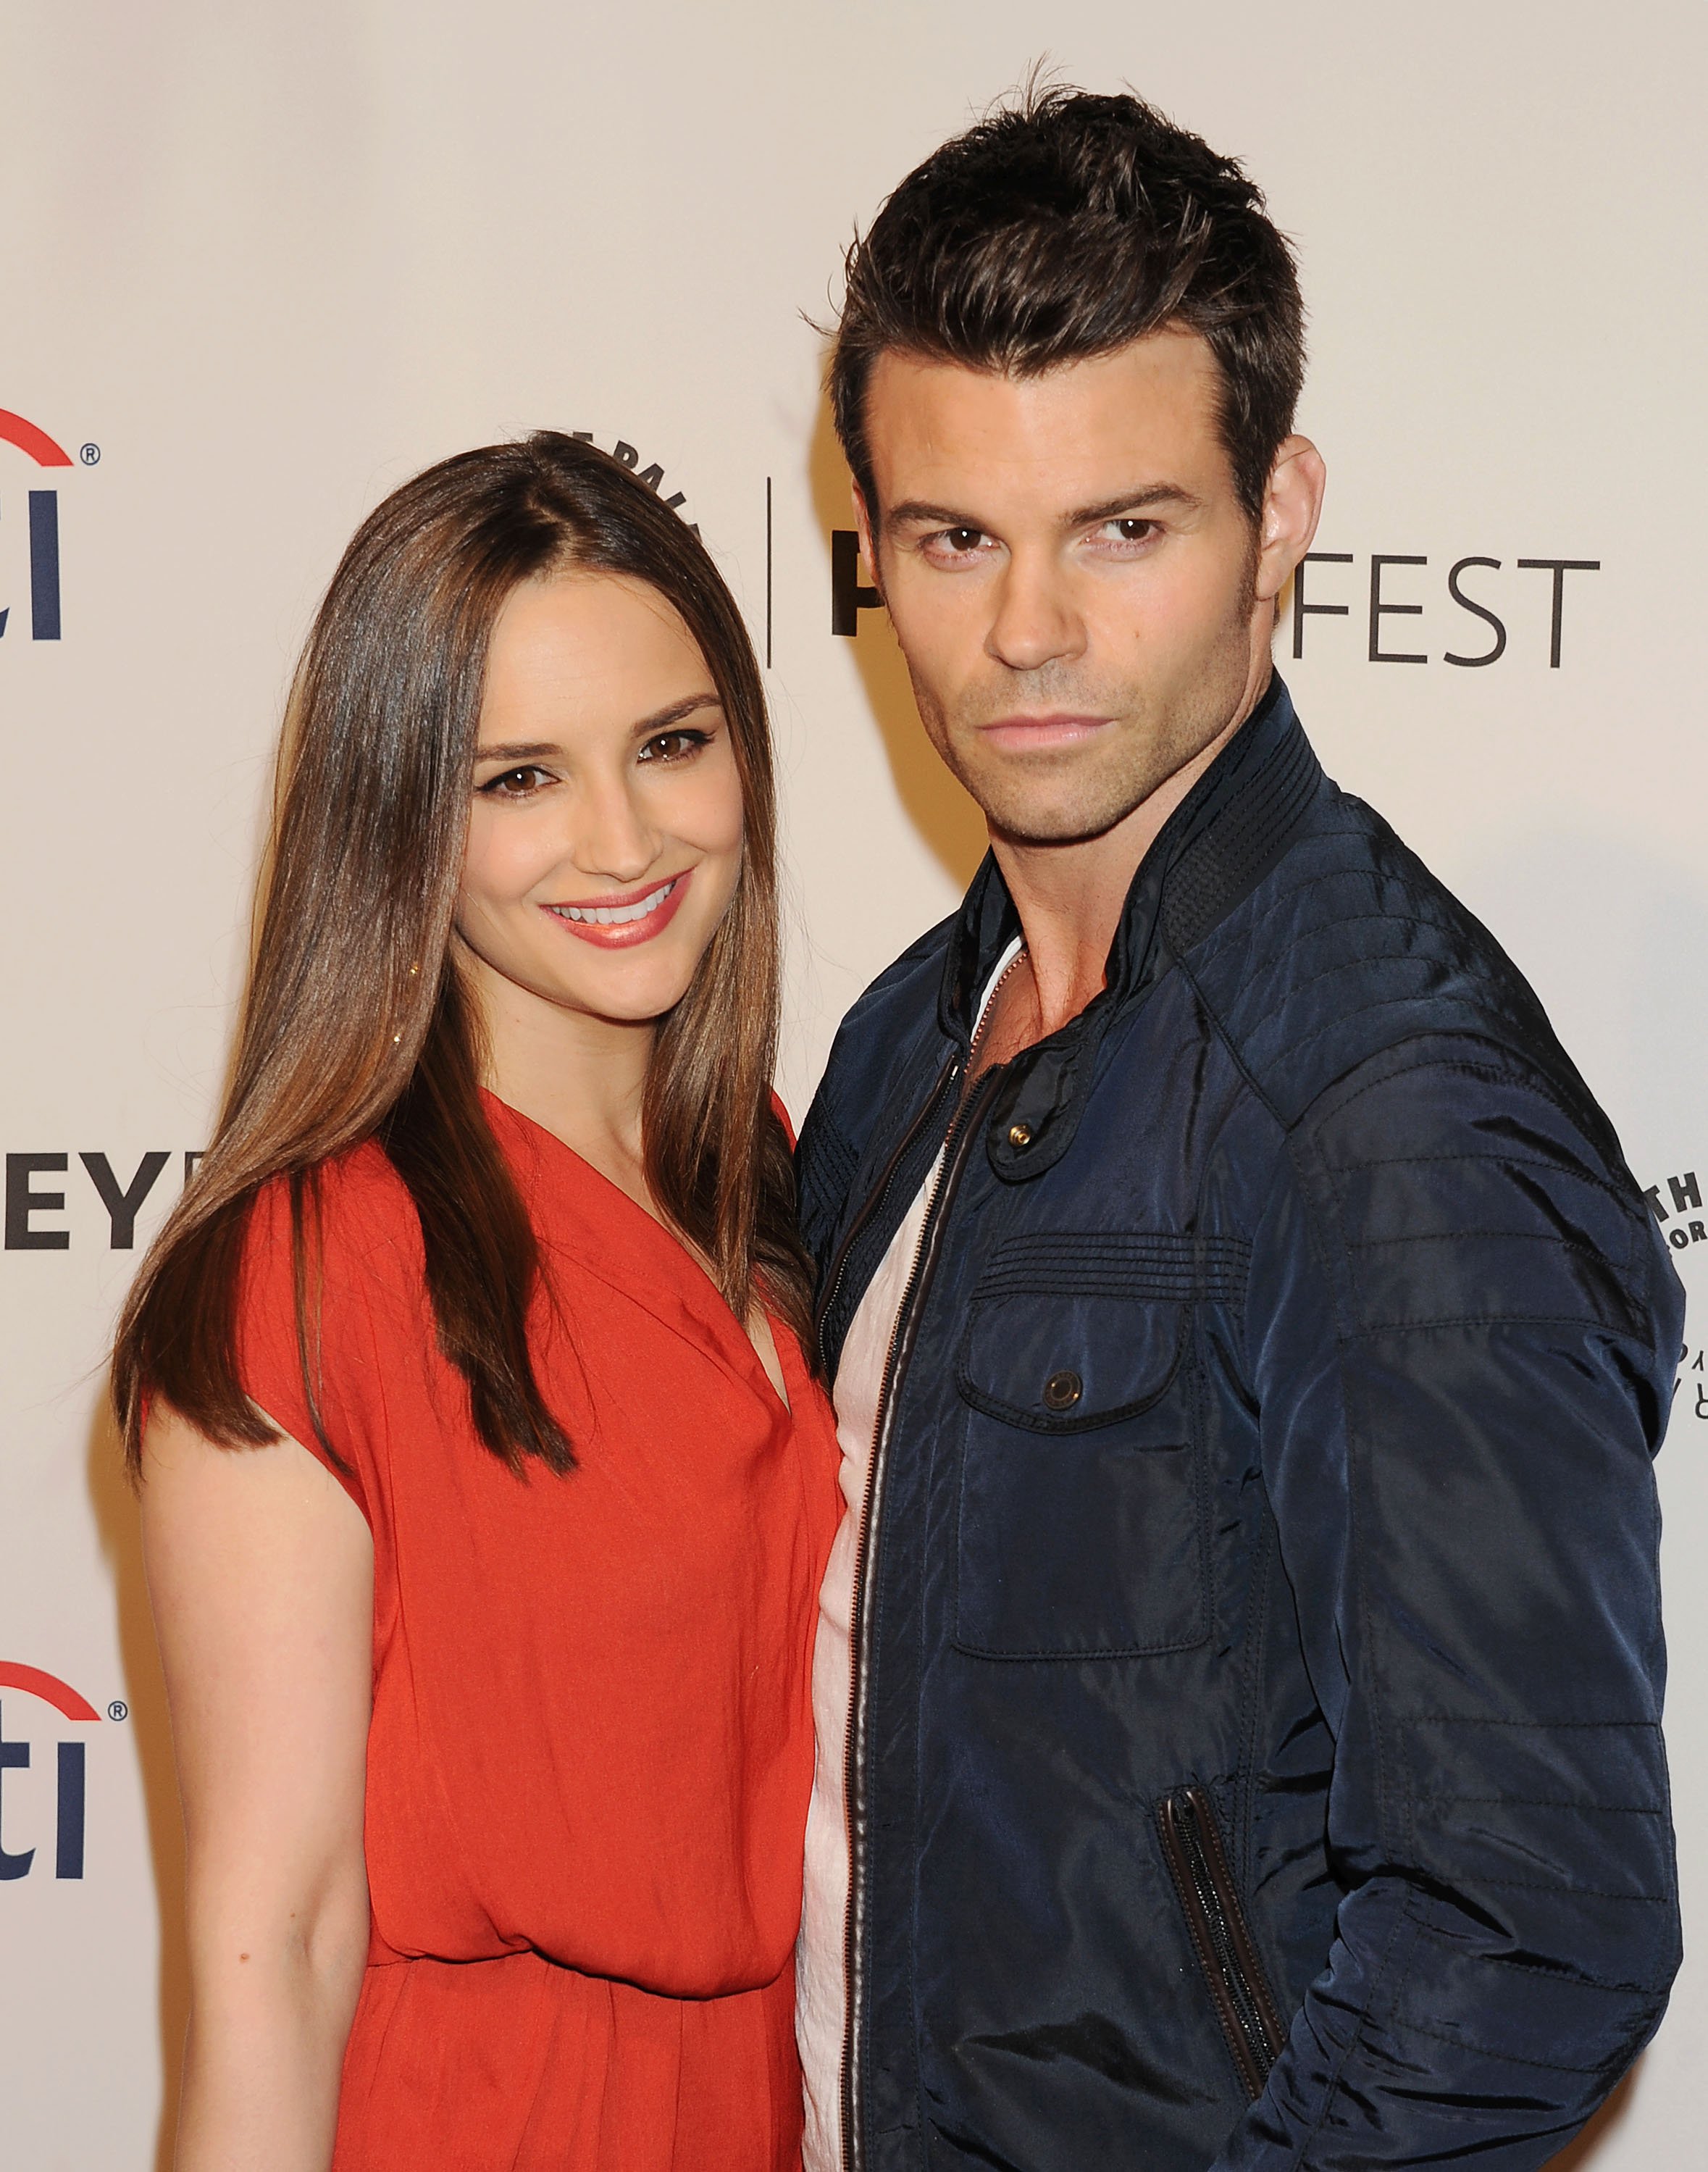 Rachael Leigh Cook and Daniel Gillies attend the 2014 PaleyFest at Dolby Theatre on March 21, 2014, in Hollywood, California. | Source: Getty Images